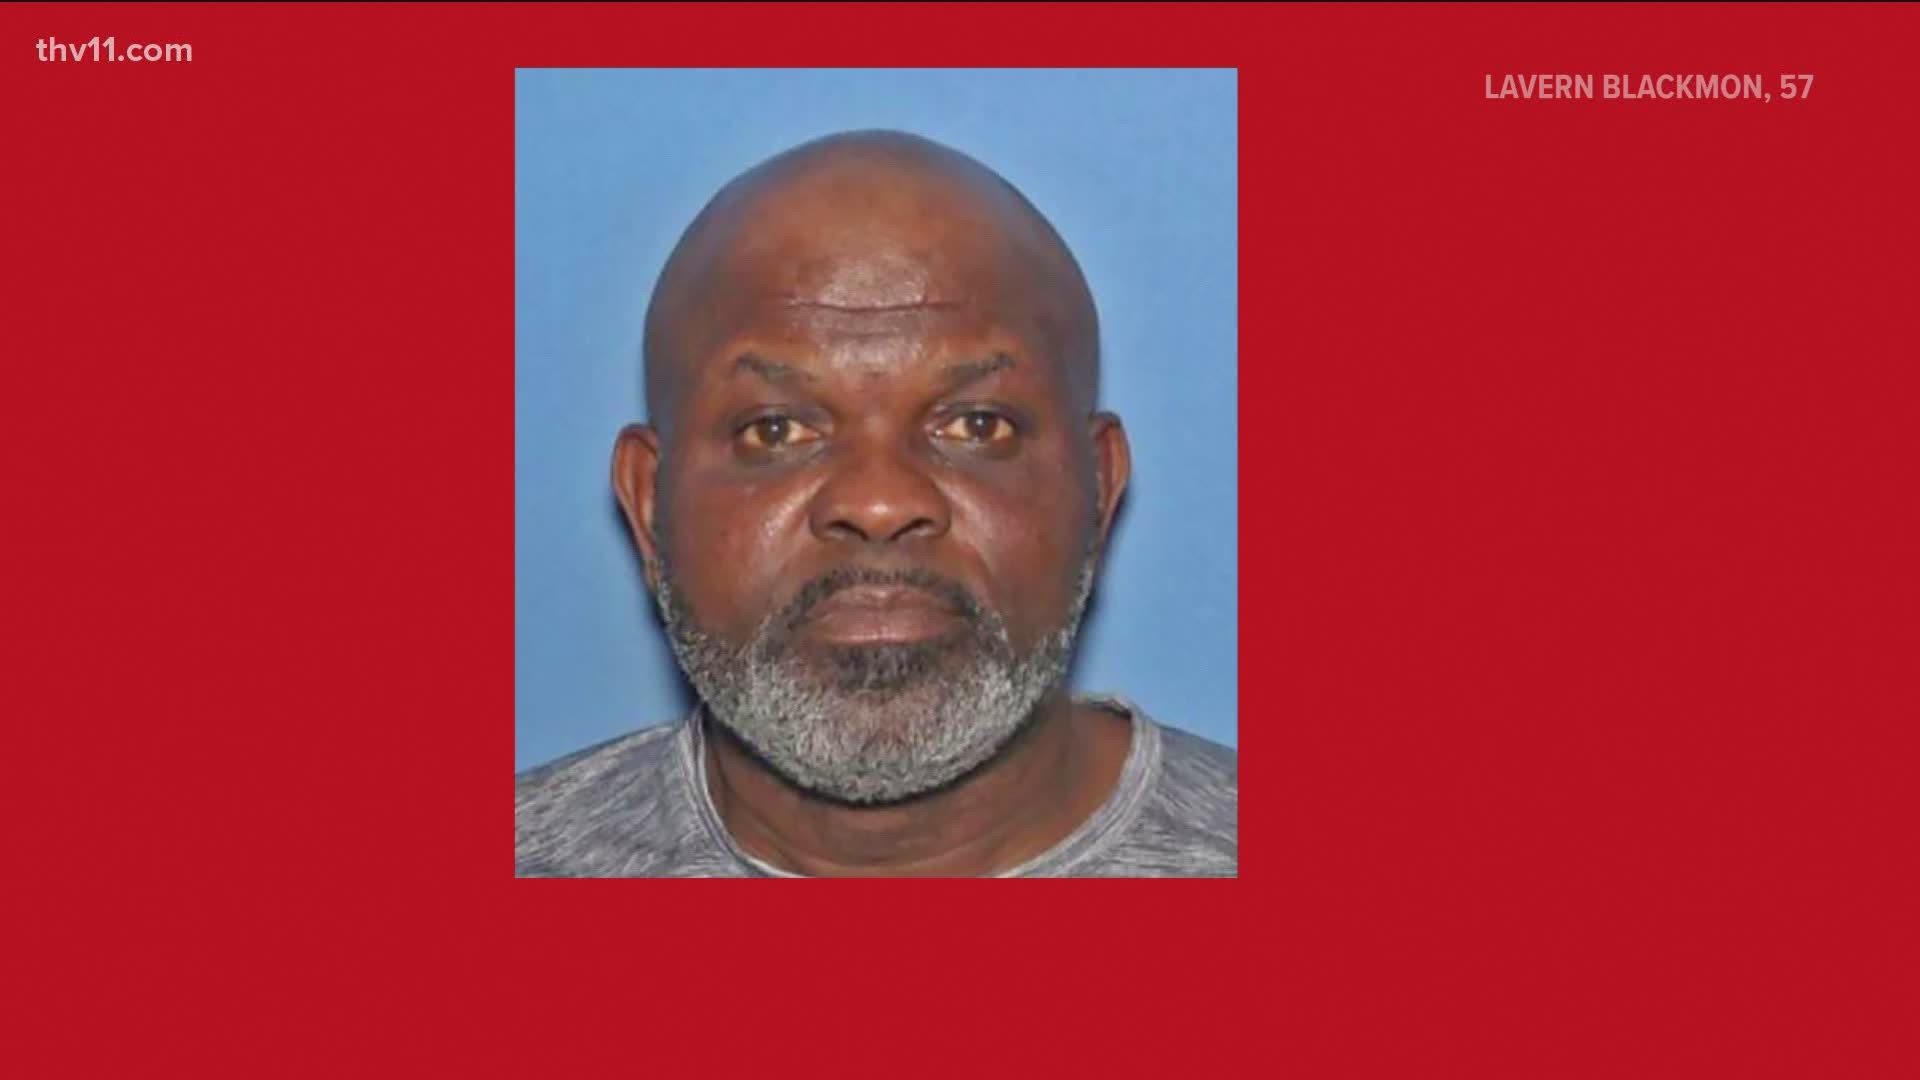 A Conway man is wanted for the kidnapping and murder of a woman in south Arkansas.